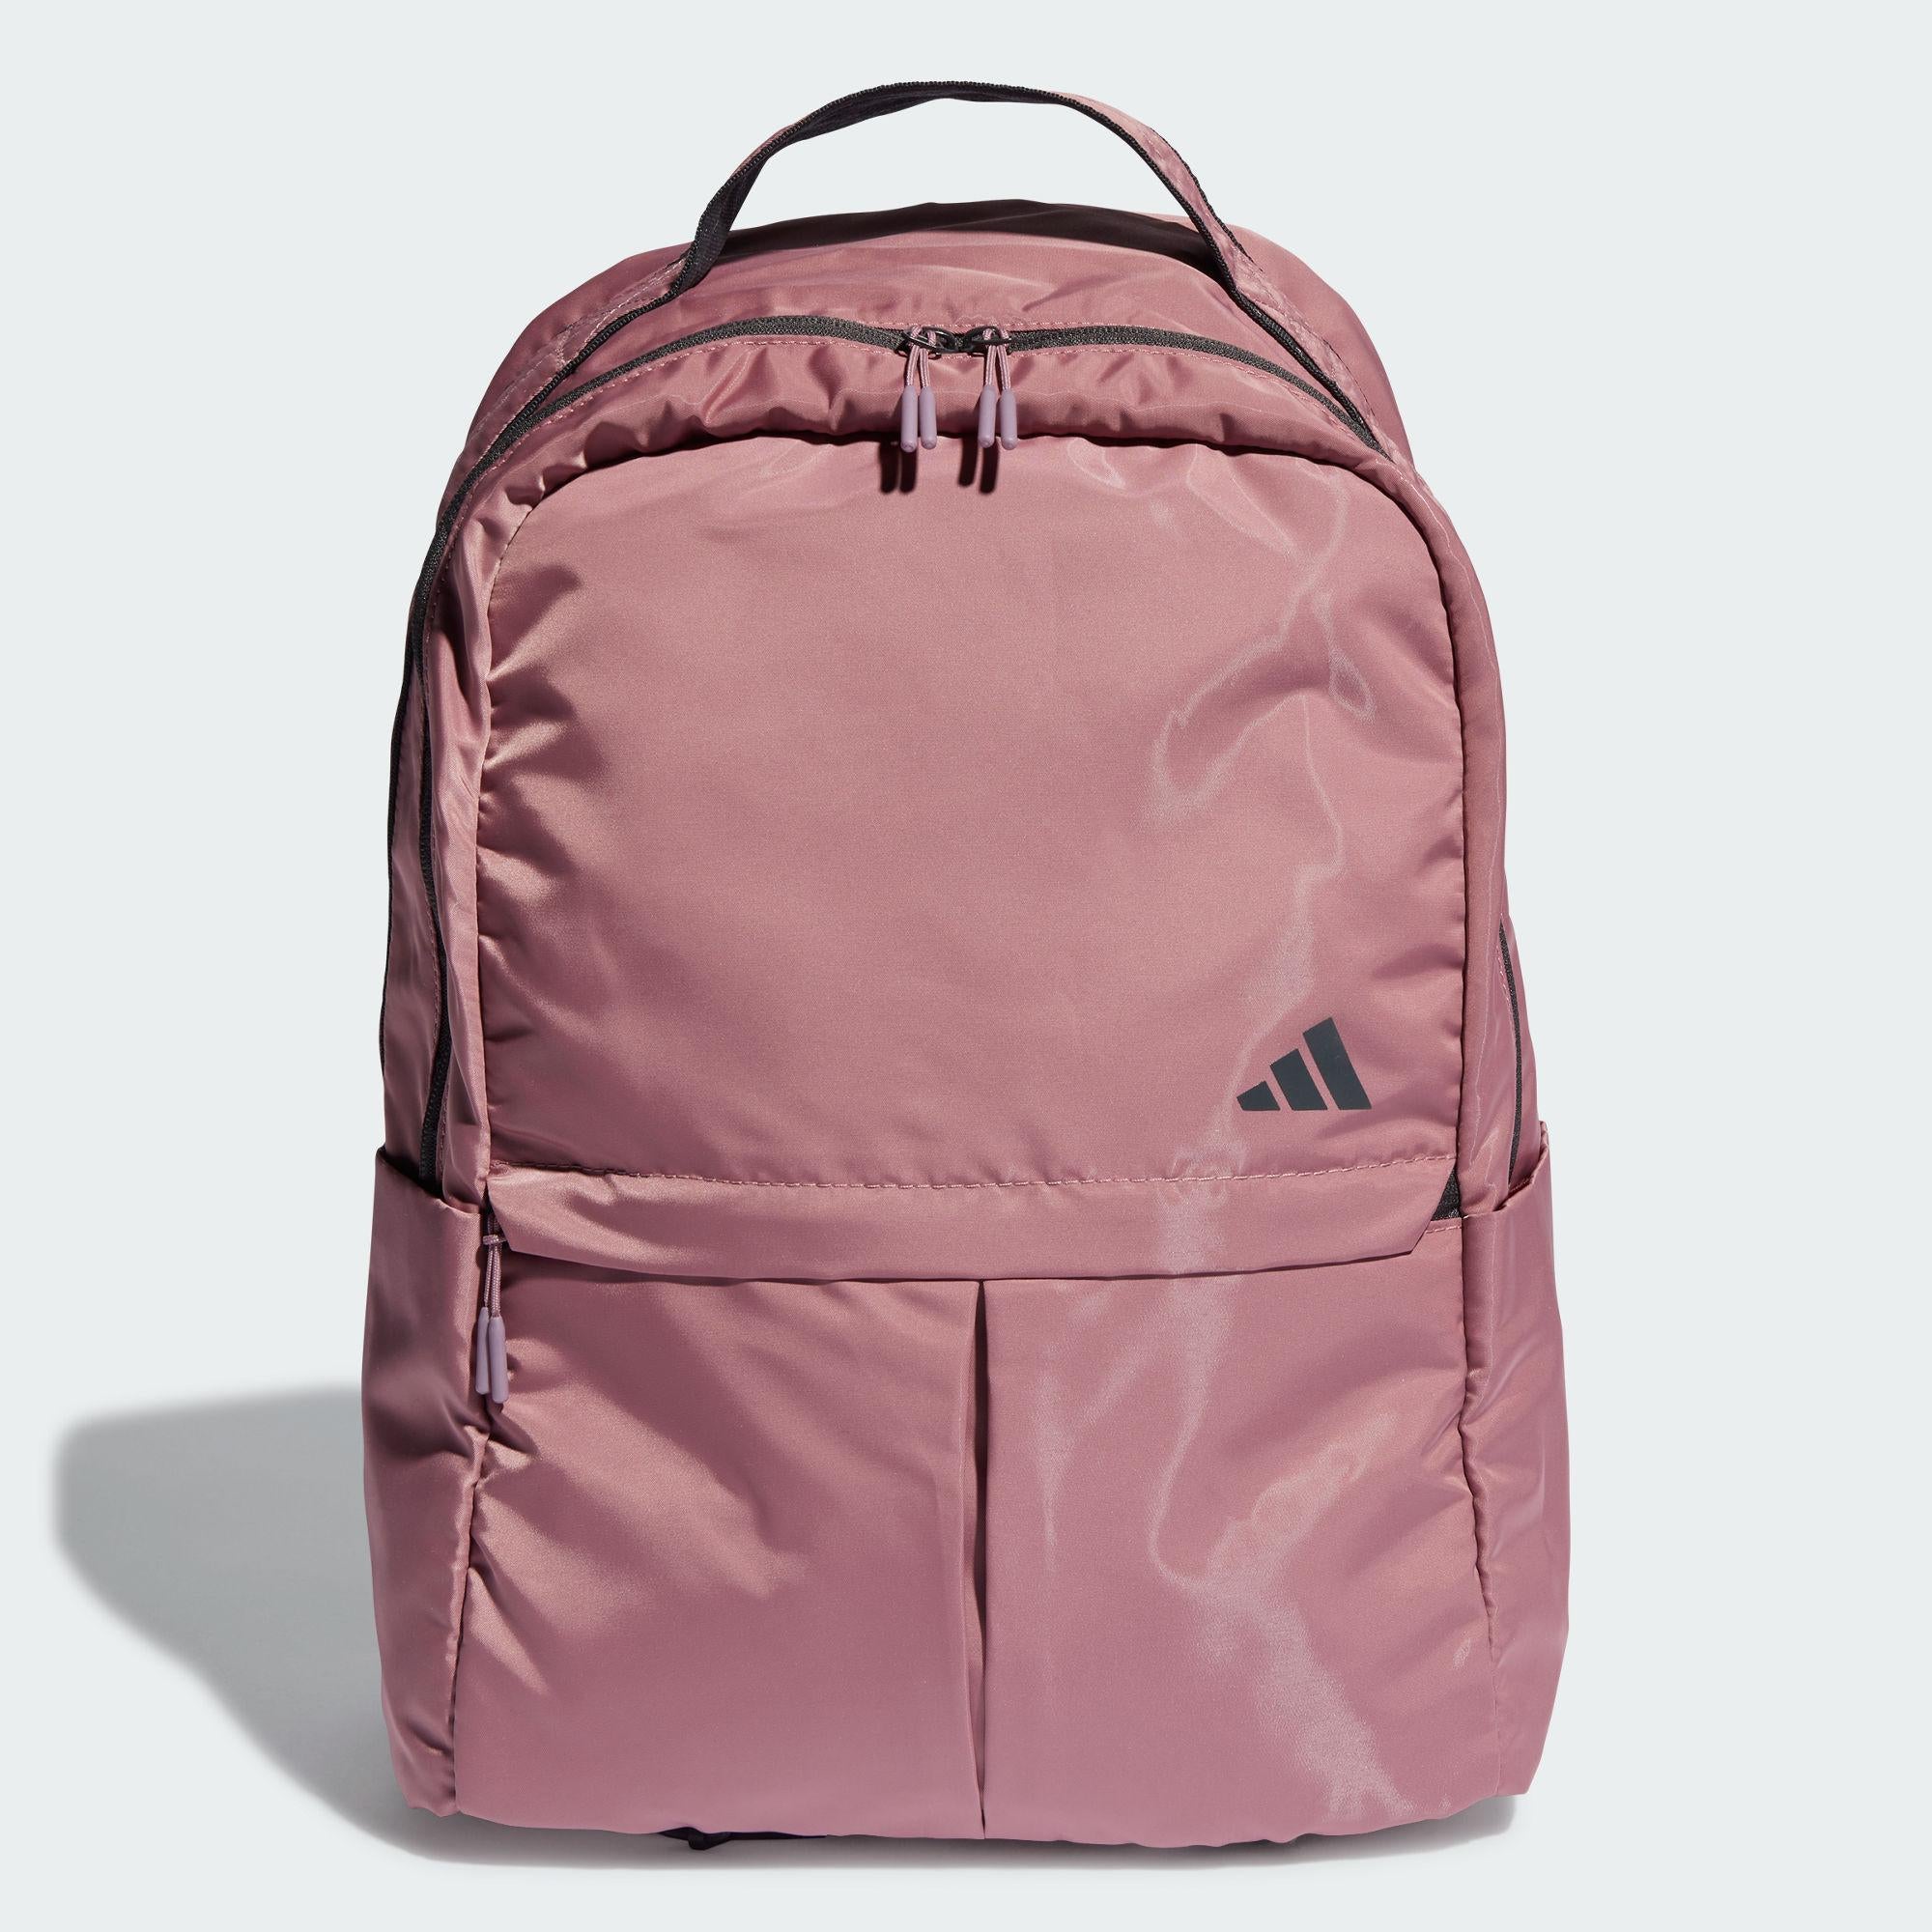  ACC, Adidas, bag, YOGA, open for kids